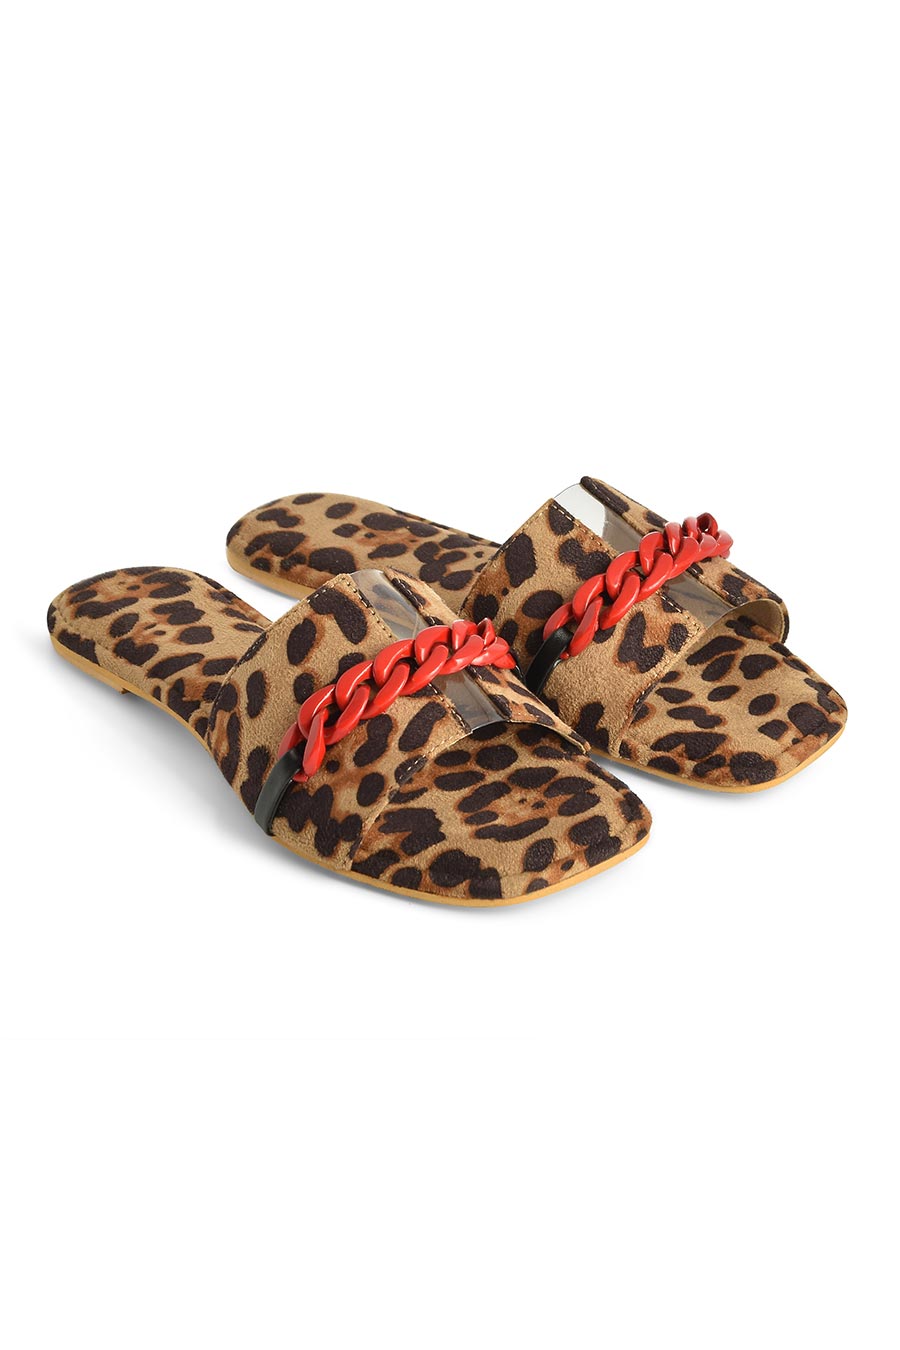 Leopard Print Flats with Red Chain